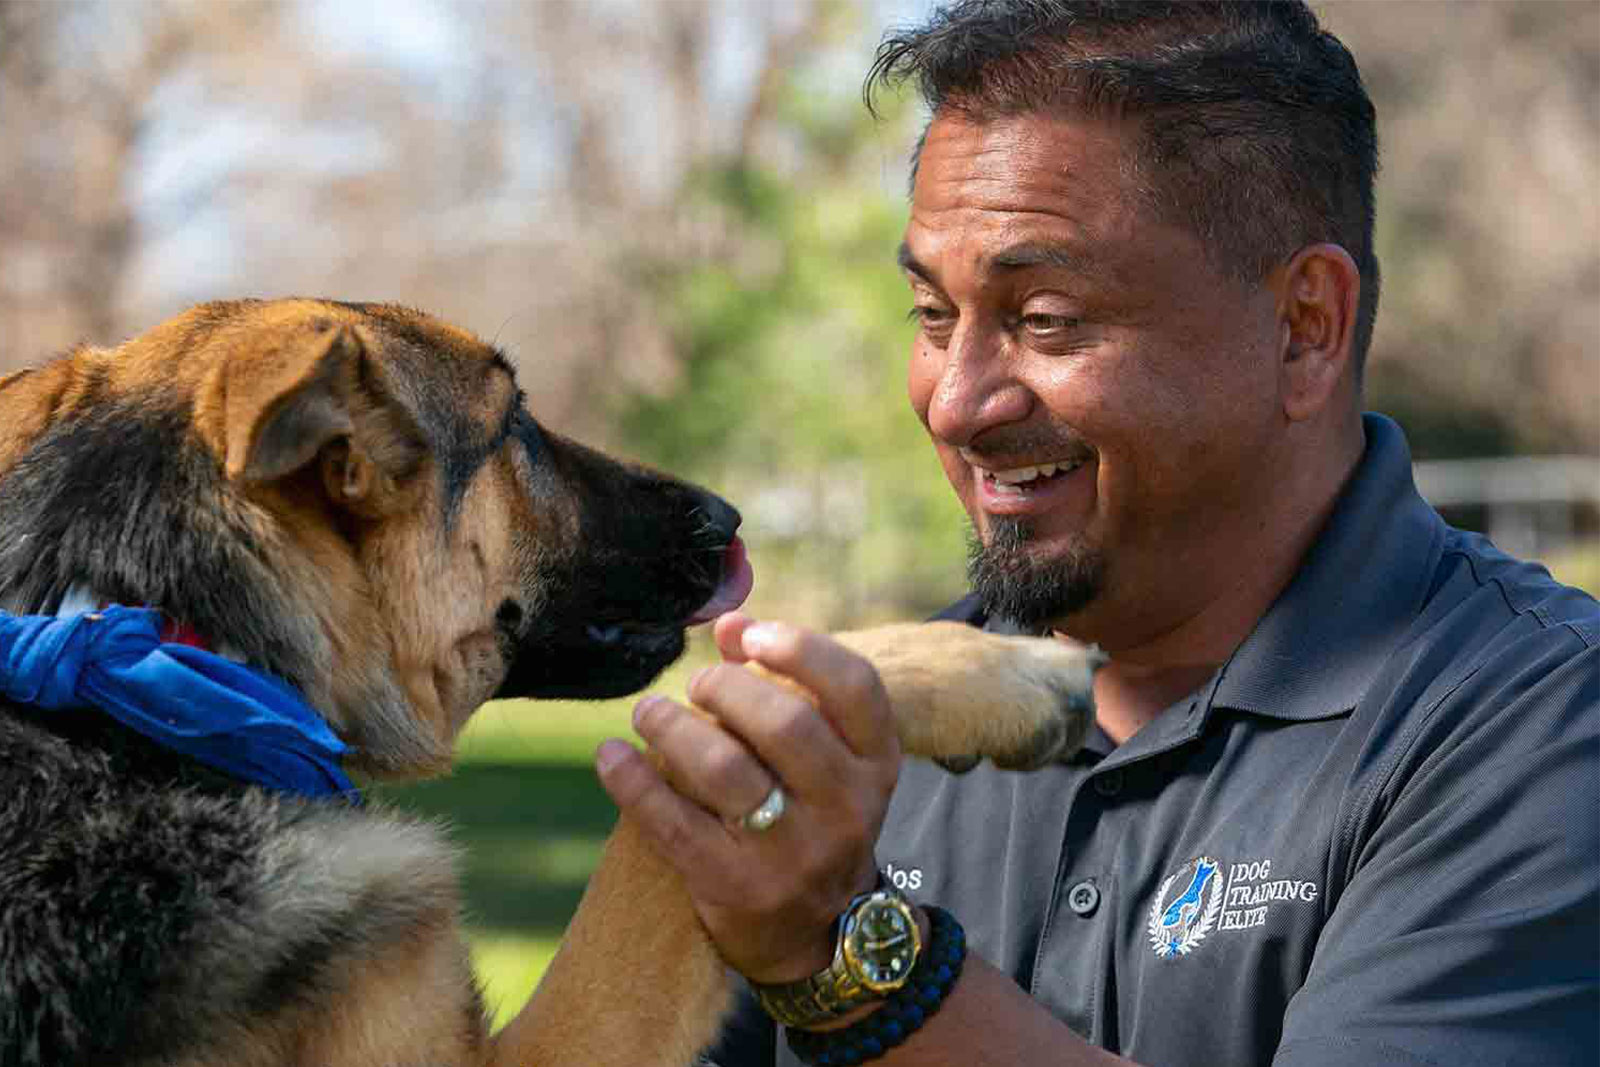 If you're looking for a fun franchise to own without any dull moments, consider Dog Training Elite.